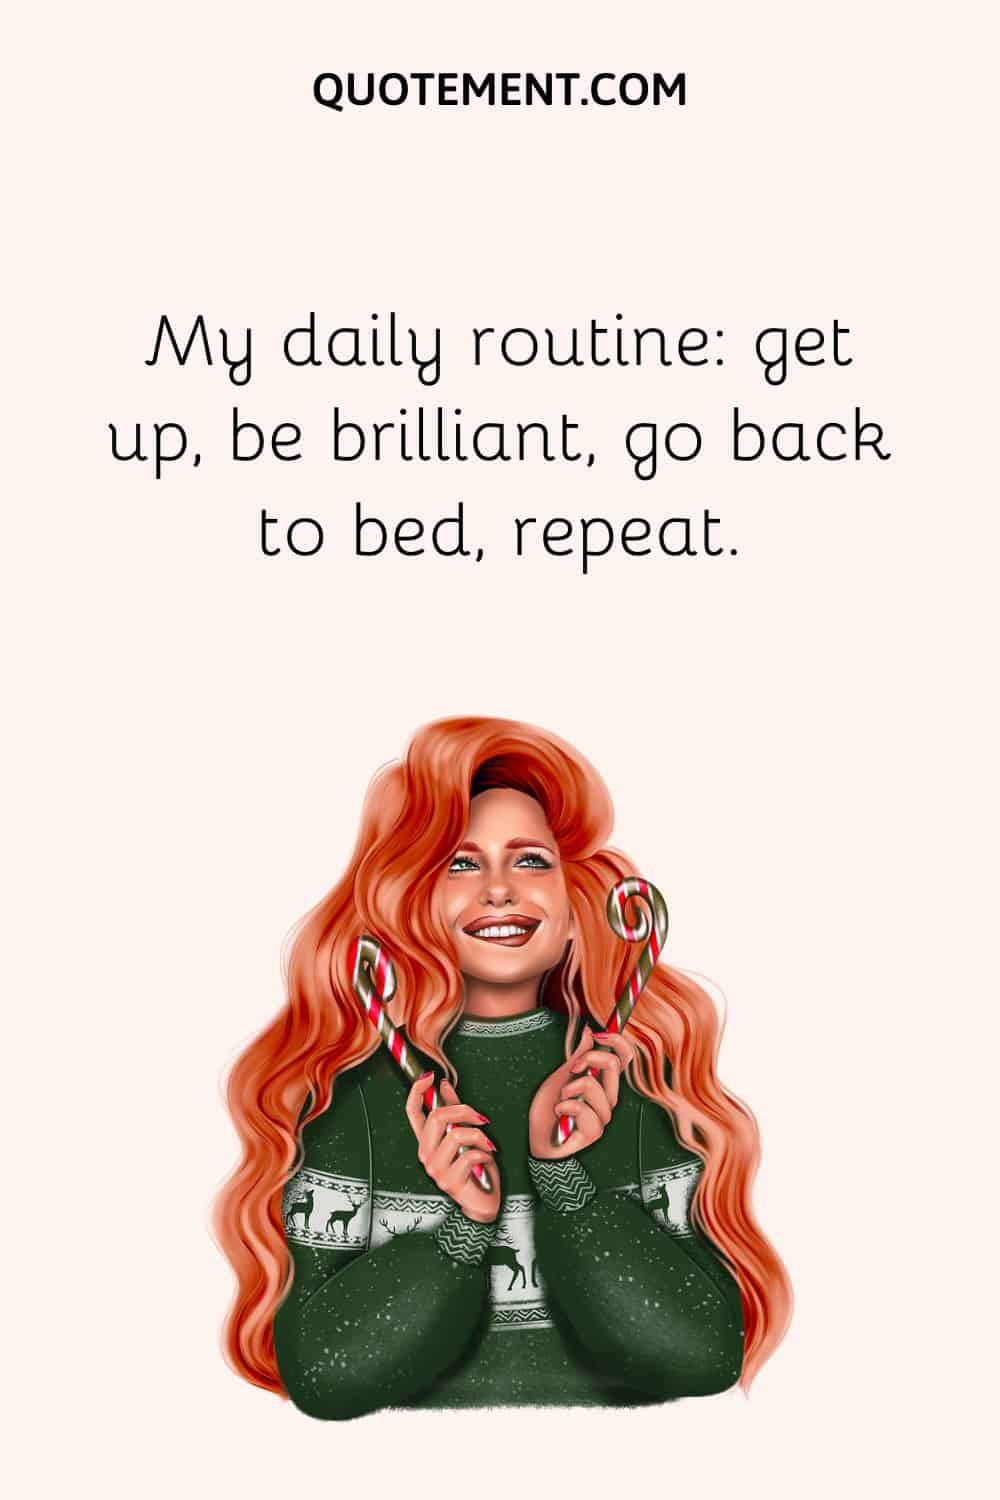 get up, be brilliant, go back to bed, repeat.